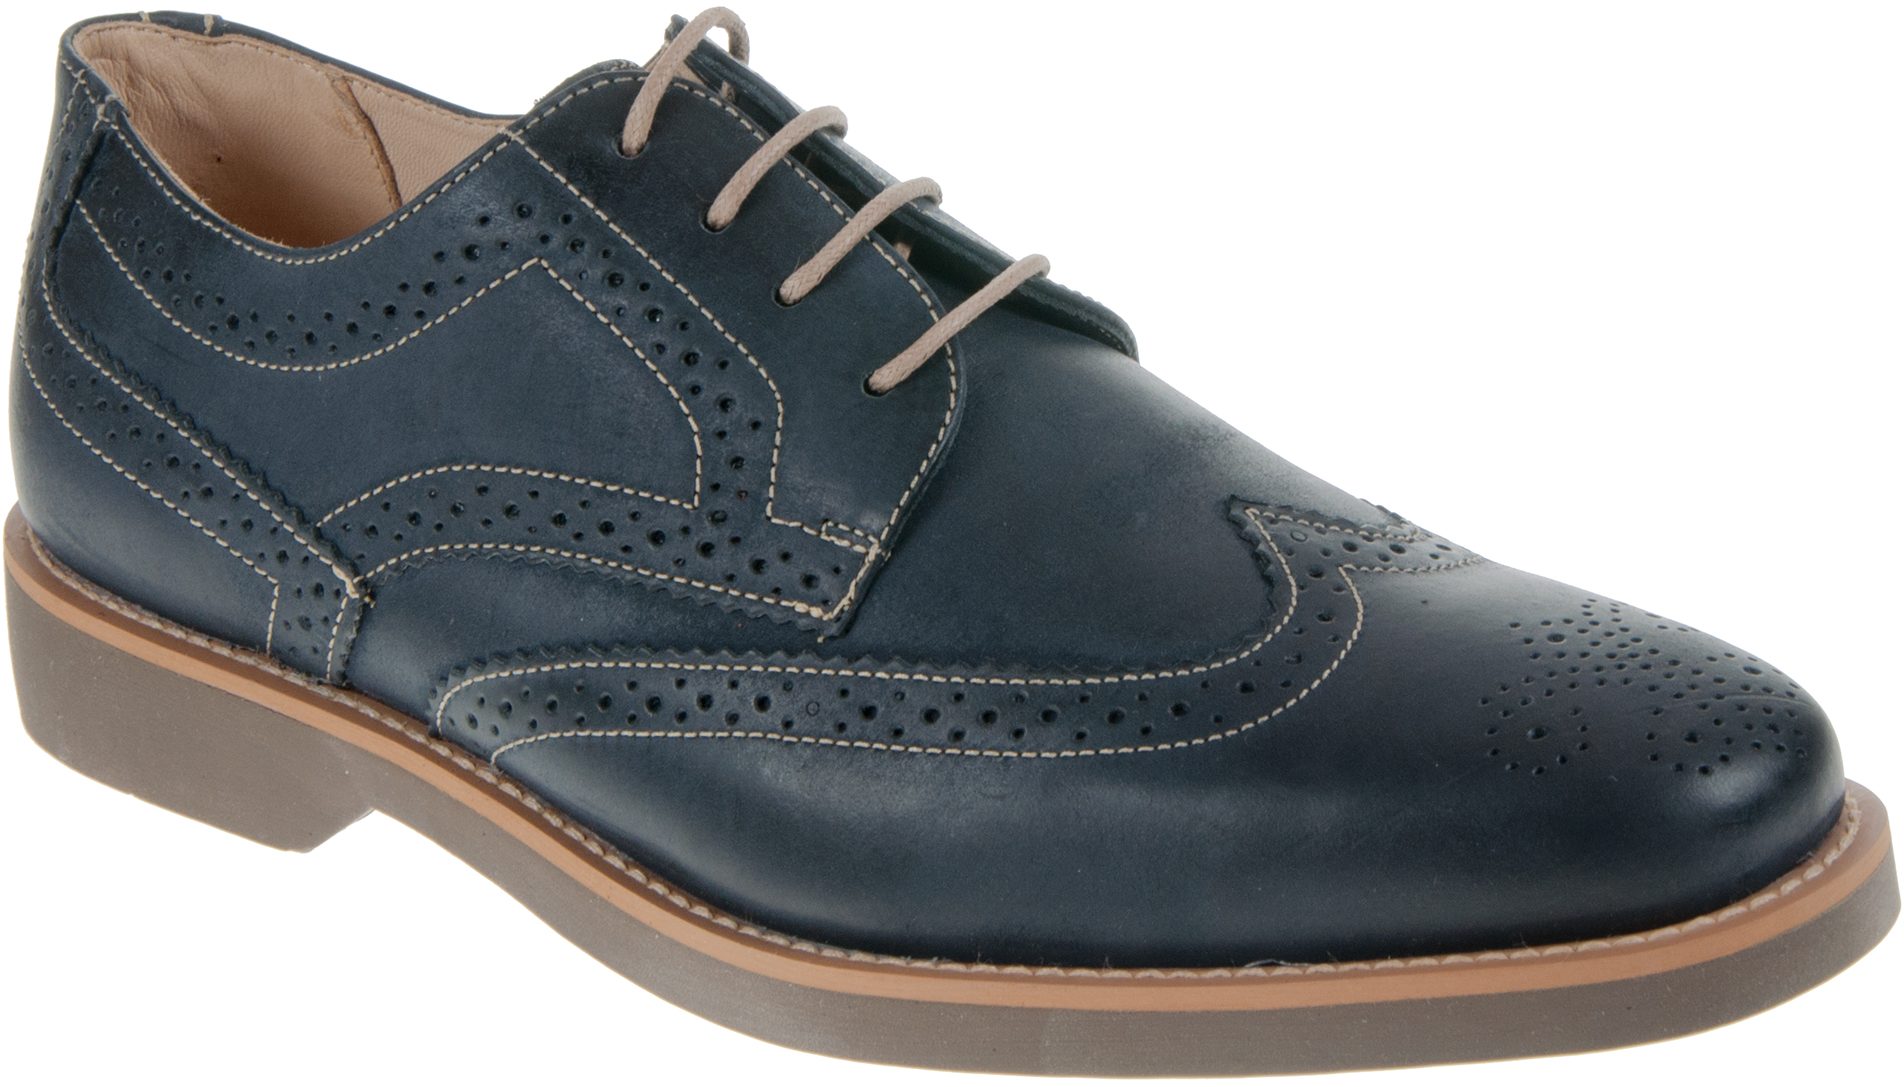 Anatomic & Co Tucano Vintage Navy 565626 - Casual Shoes - Humphries Shoes